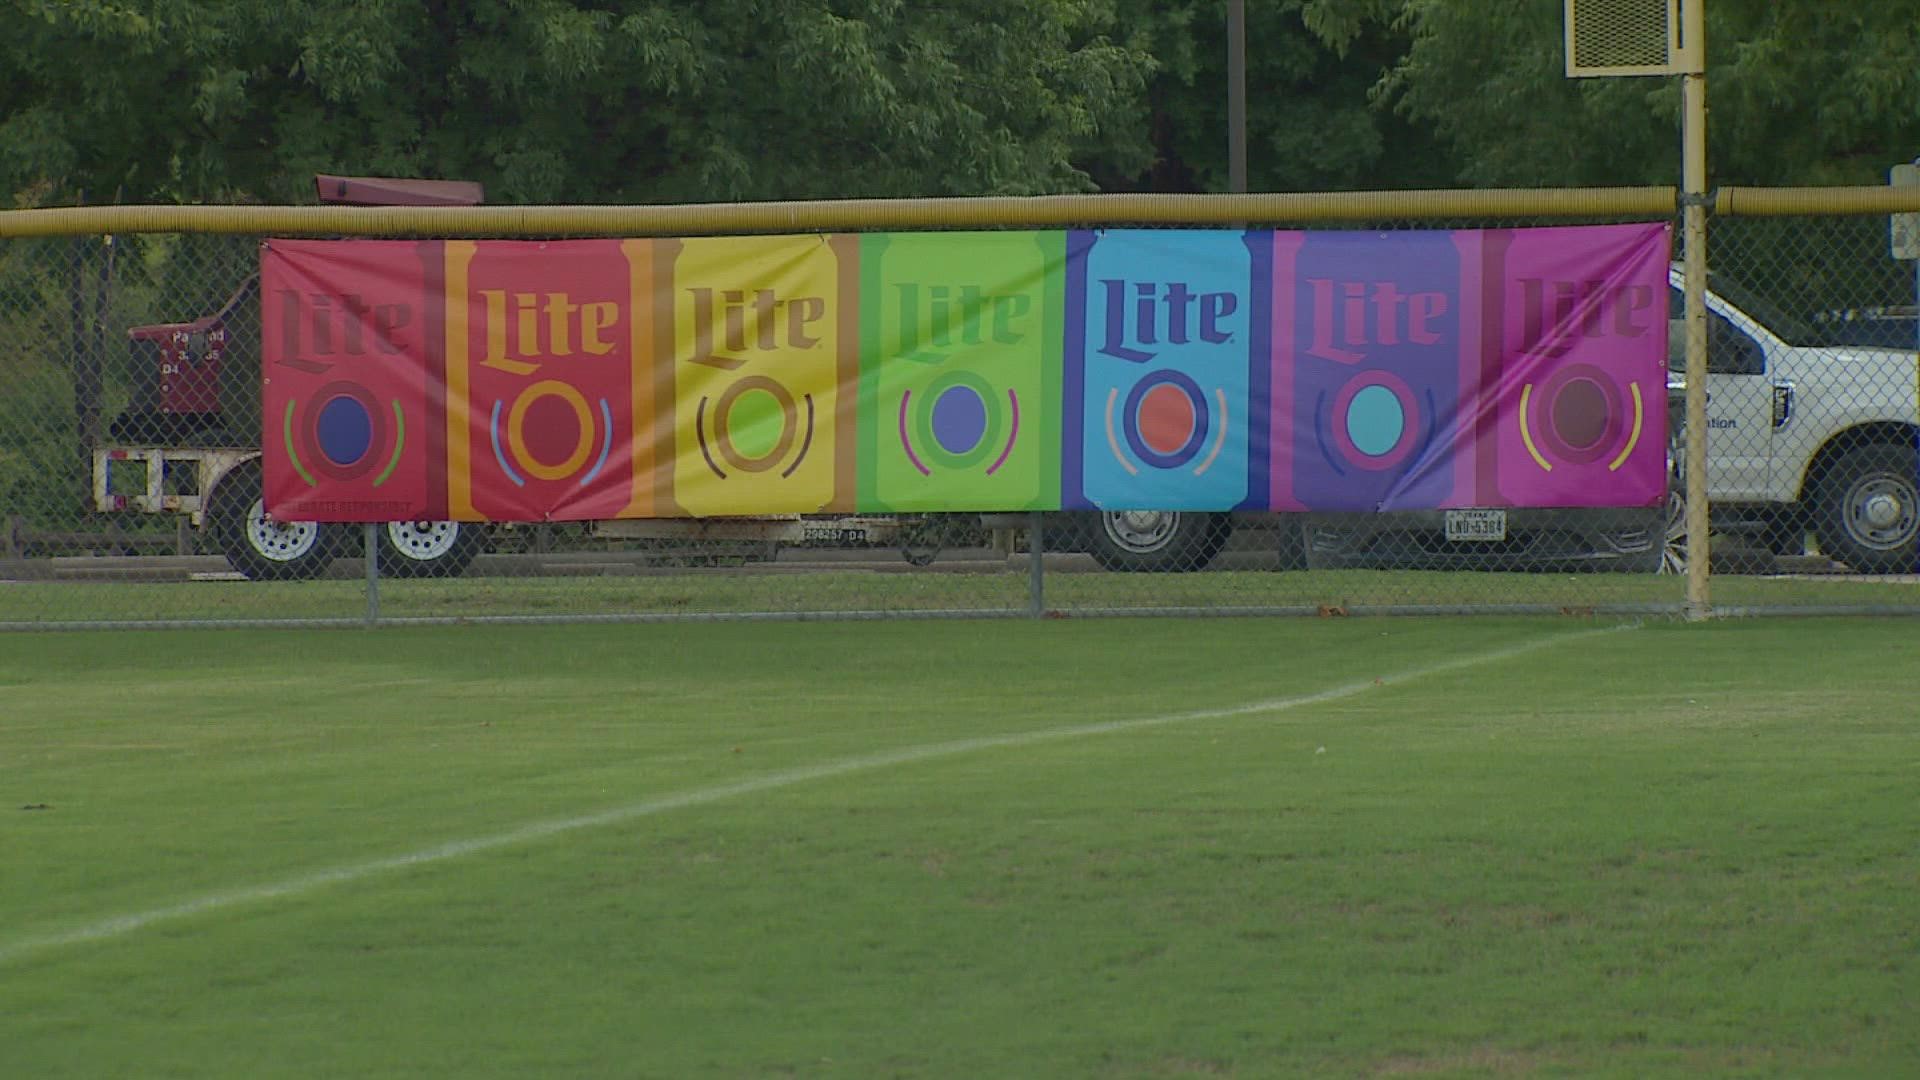 The North American Gay Amateur Athletic Alliance expects over 5,000 people to come to North Texas for the tournament.